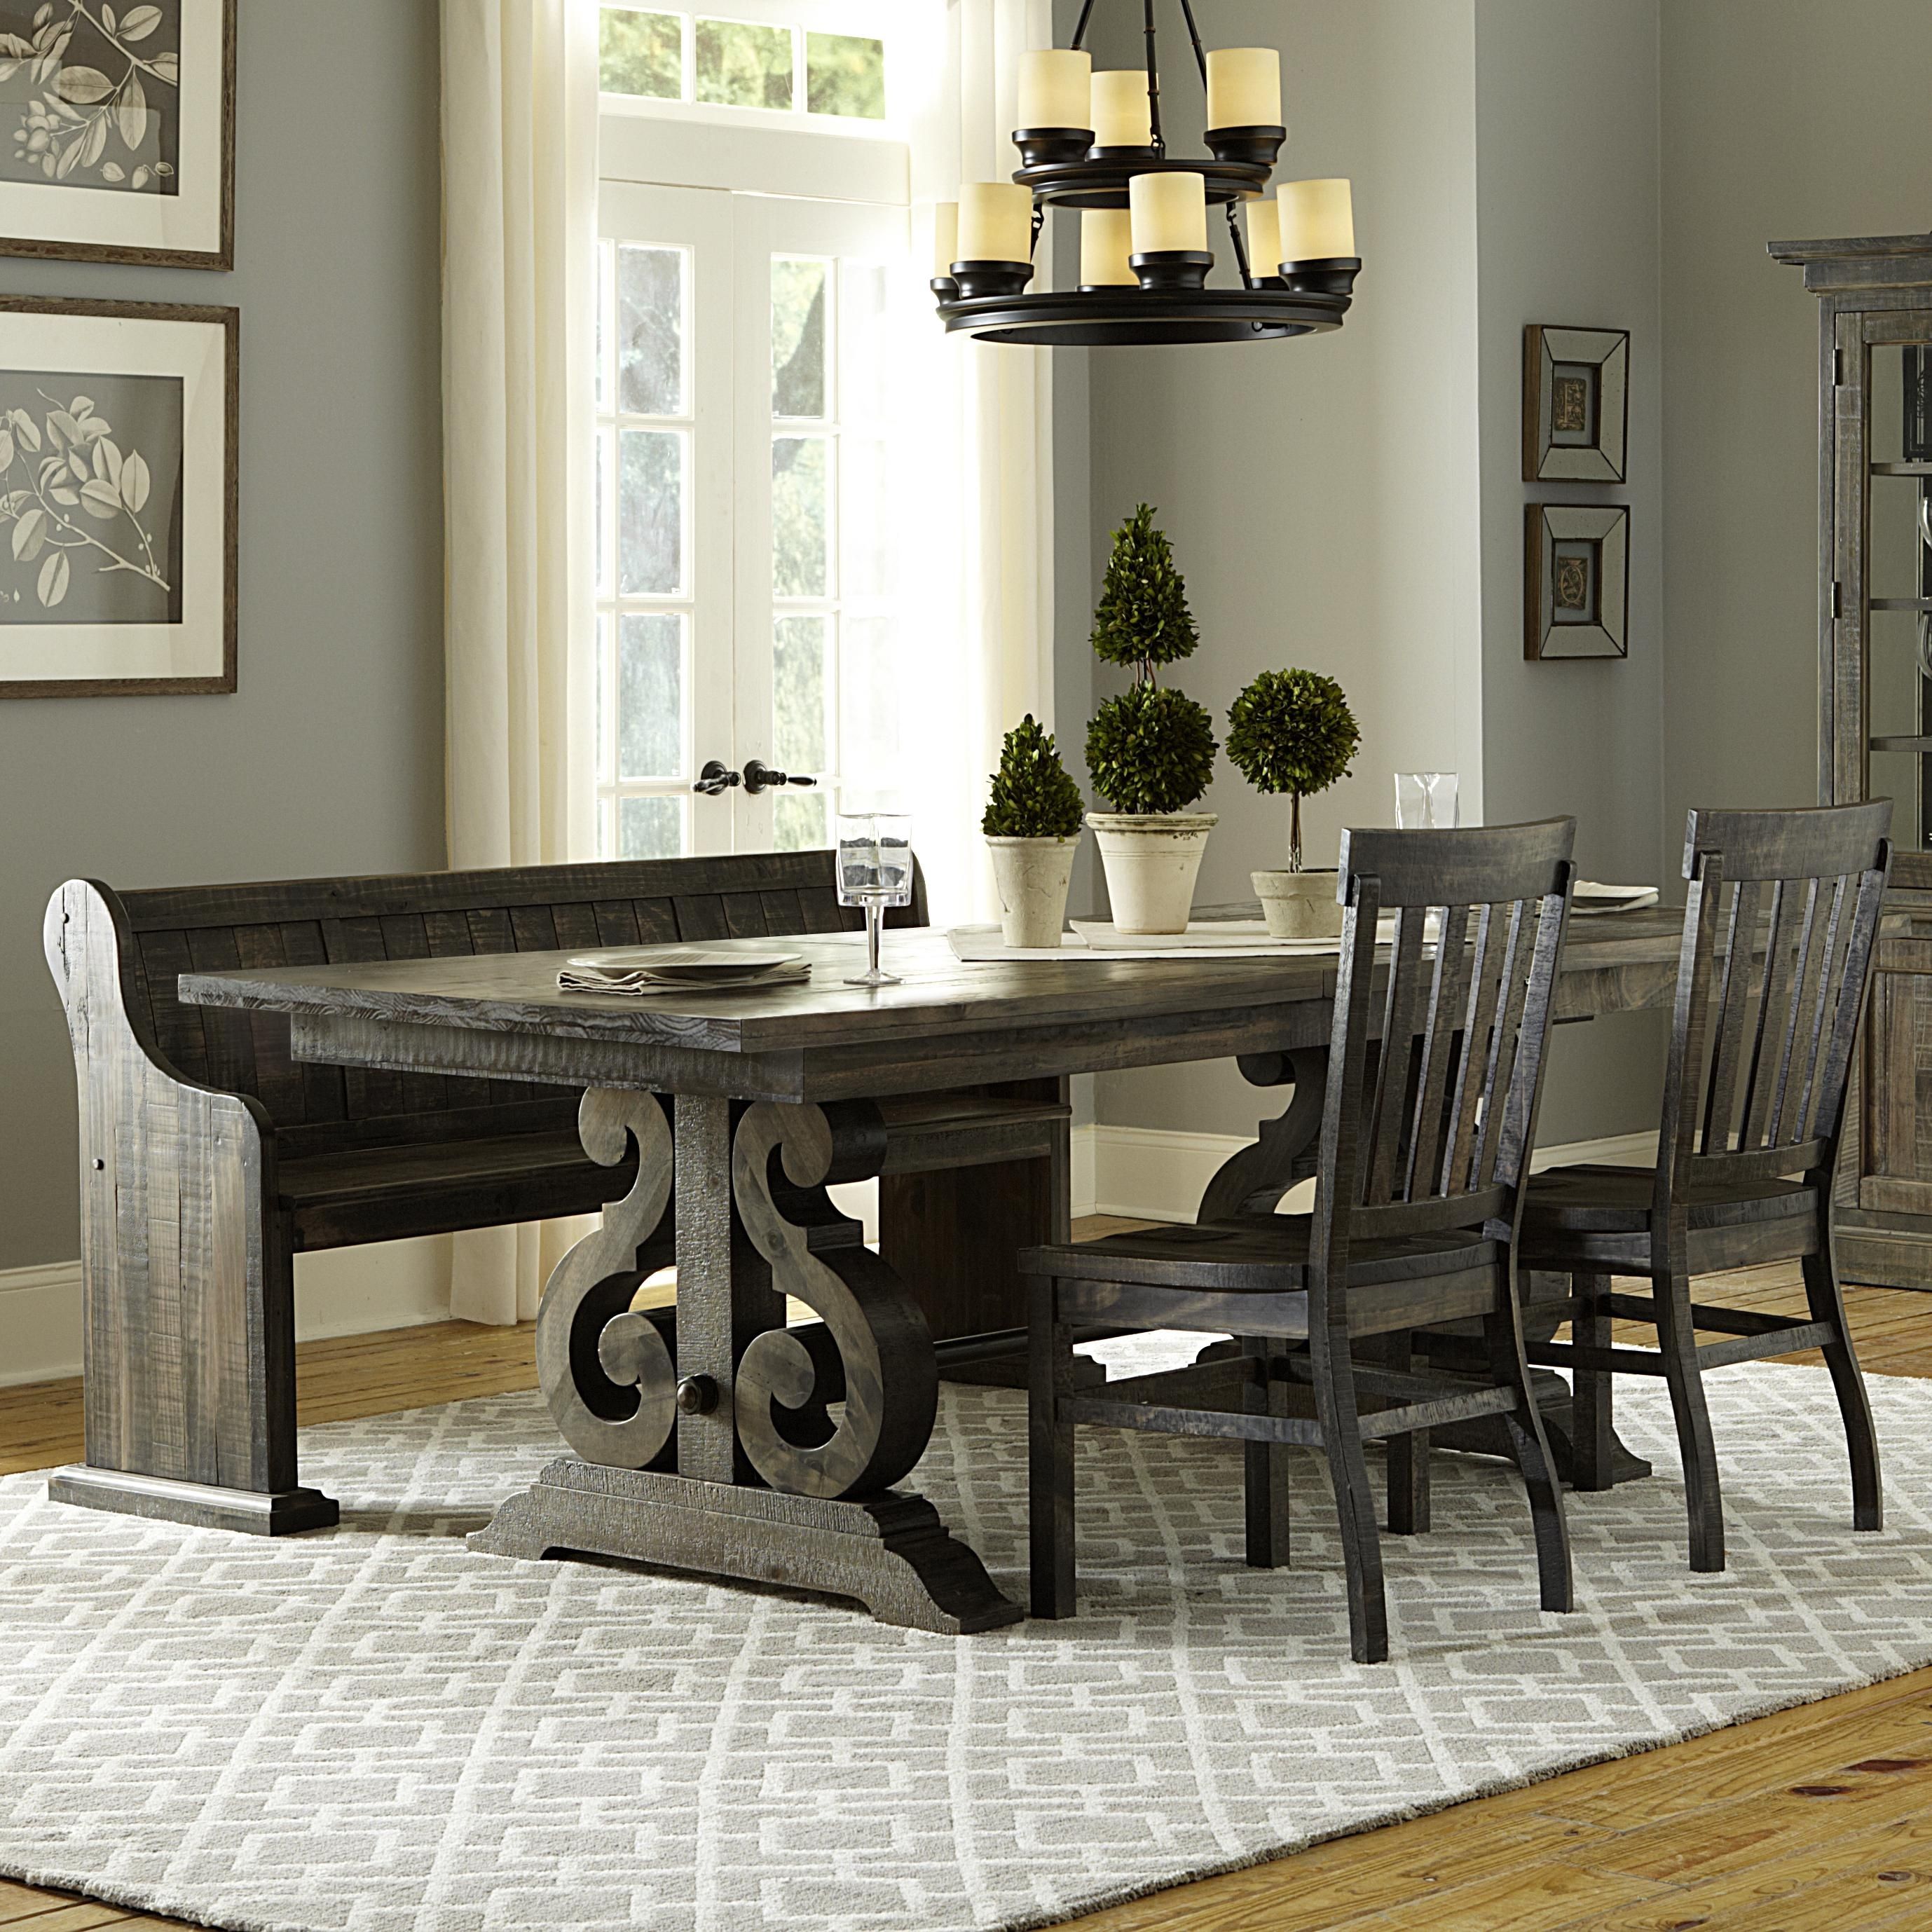 Table And Chair Sets | Baton Rouge And Lafayette, Louisiana Table With Regard To Best And Newest Market 7 Piece Dining Sets With Host And Side Chairs (View 16 of 20)